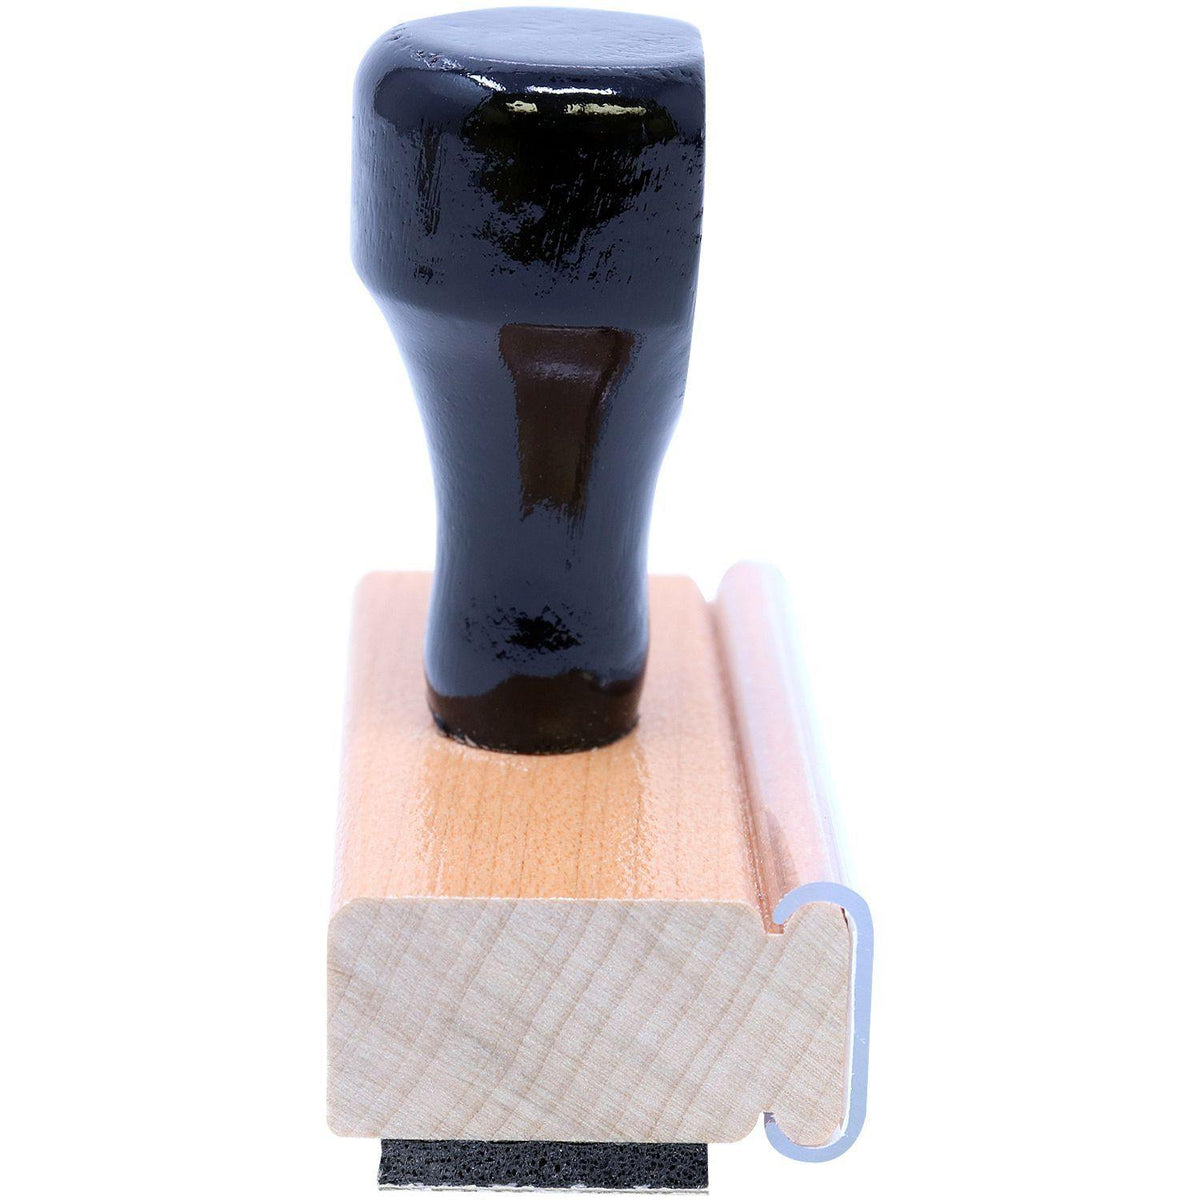 Large Witness Rubber Stamp - Engineer Seal Stamps - Brand_Acorn, Impression Size_Large, Stamp Type_Regular Stamp, Type of Use_Legal